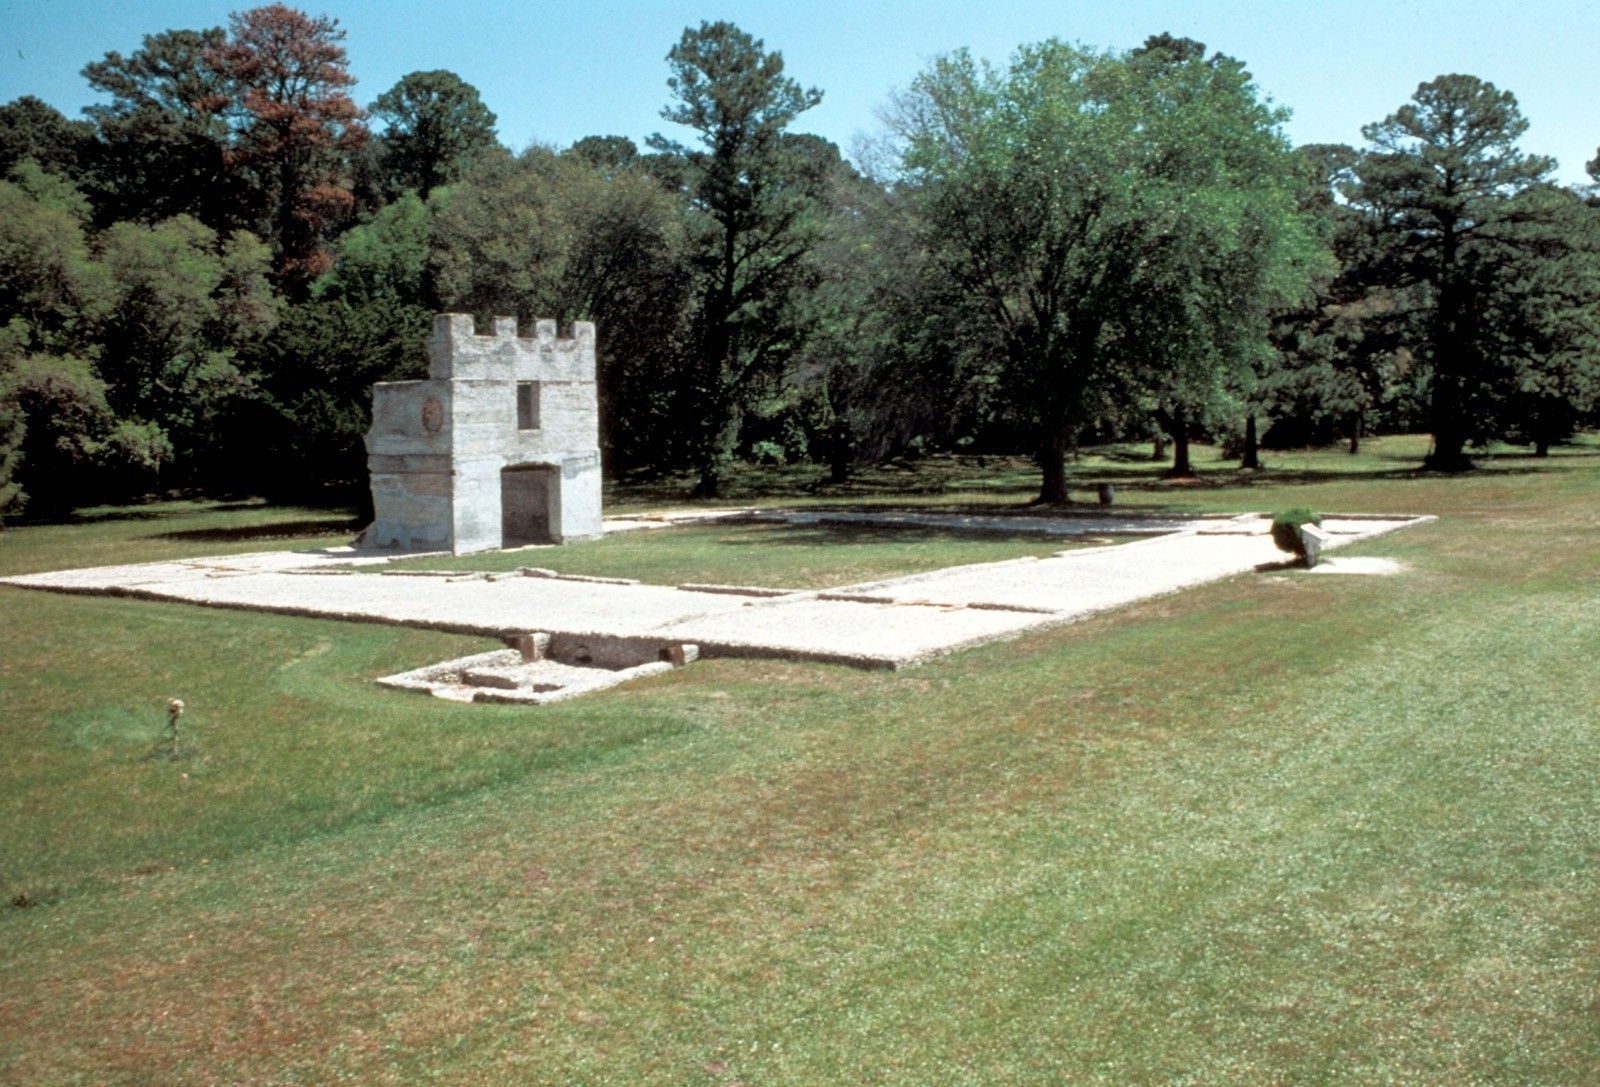 The Barracks ruin is one of the few above ground structures at Fort Frederica